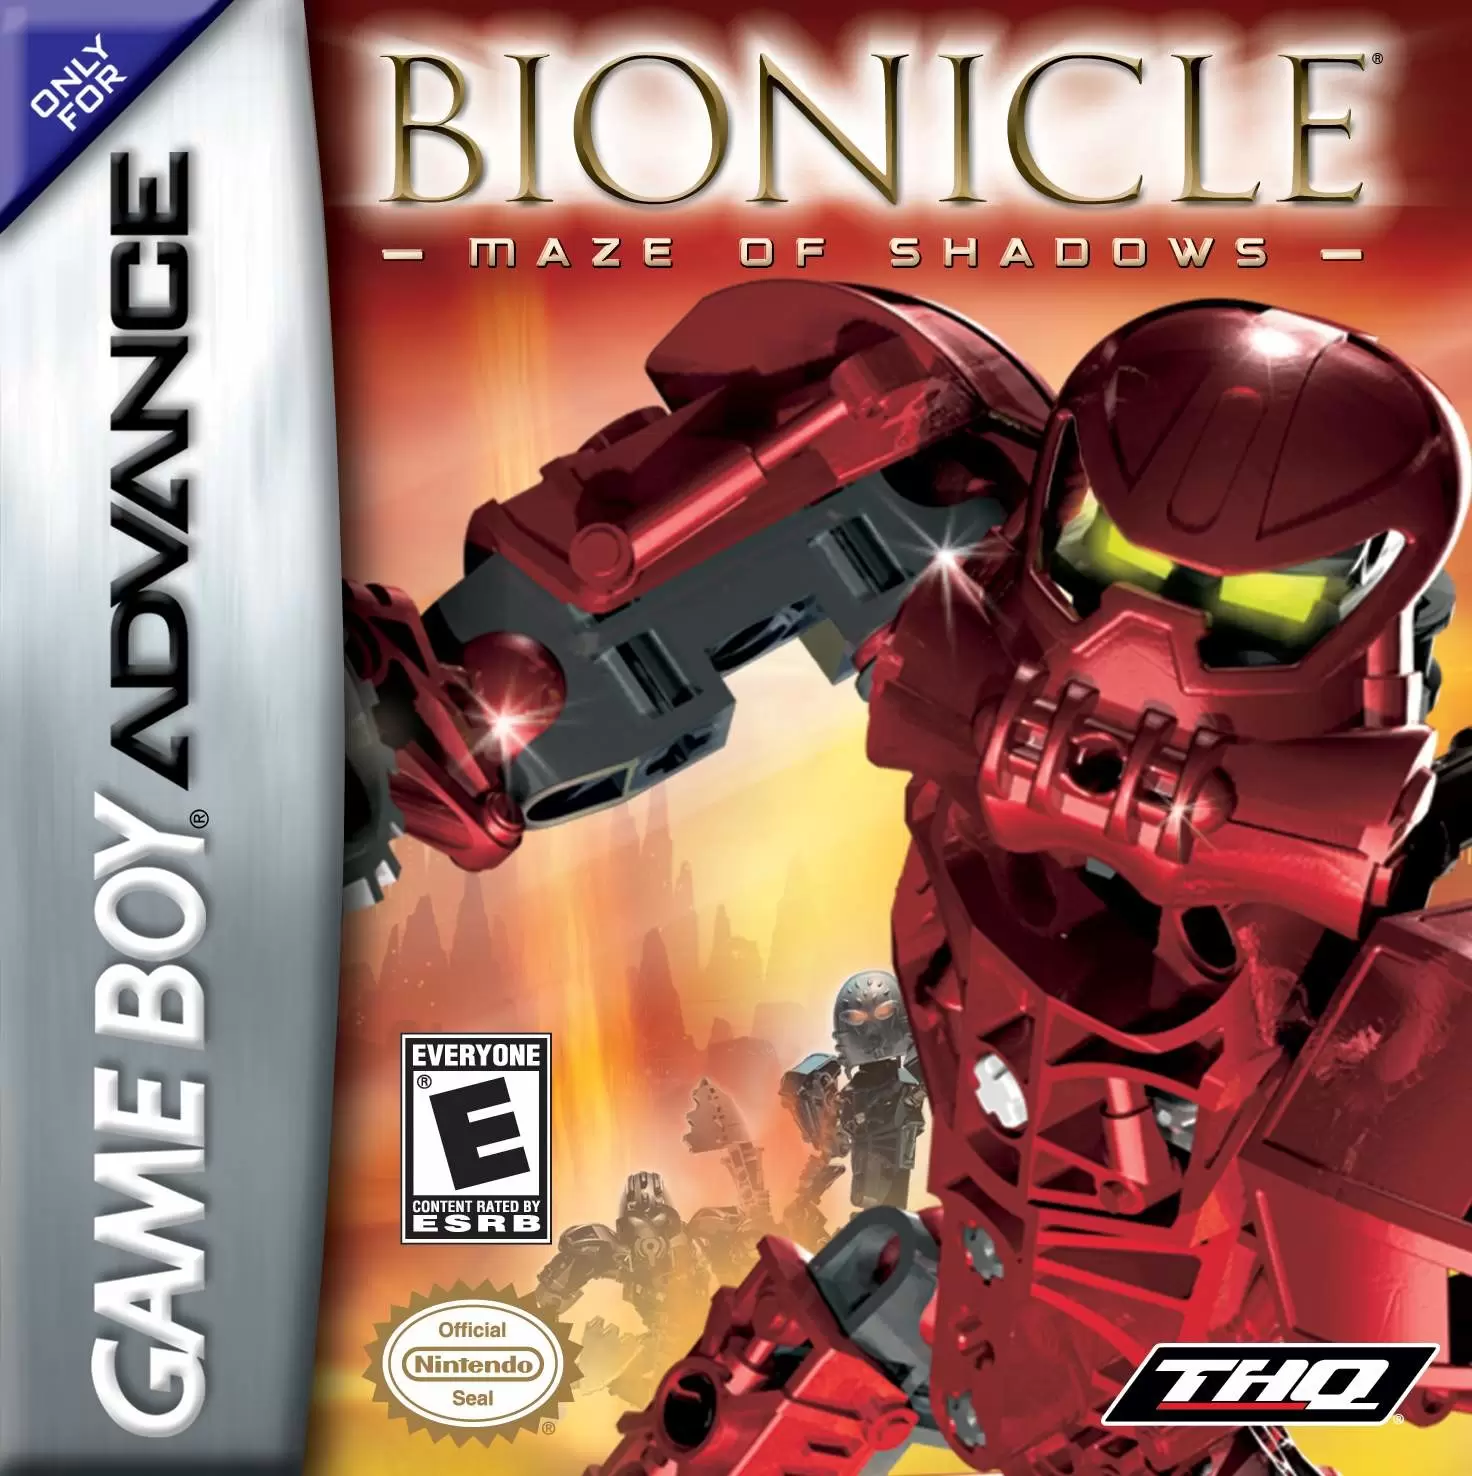 Game Boy Advance Games - Bionicle: Maze of Shadows